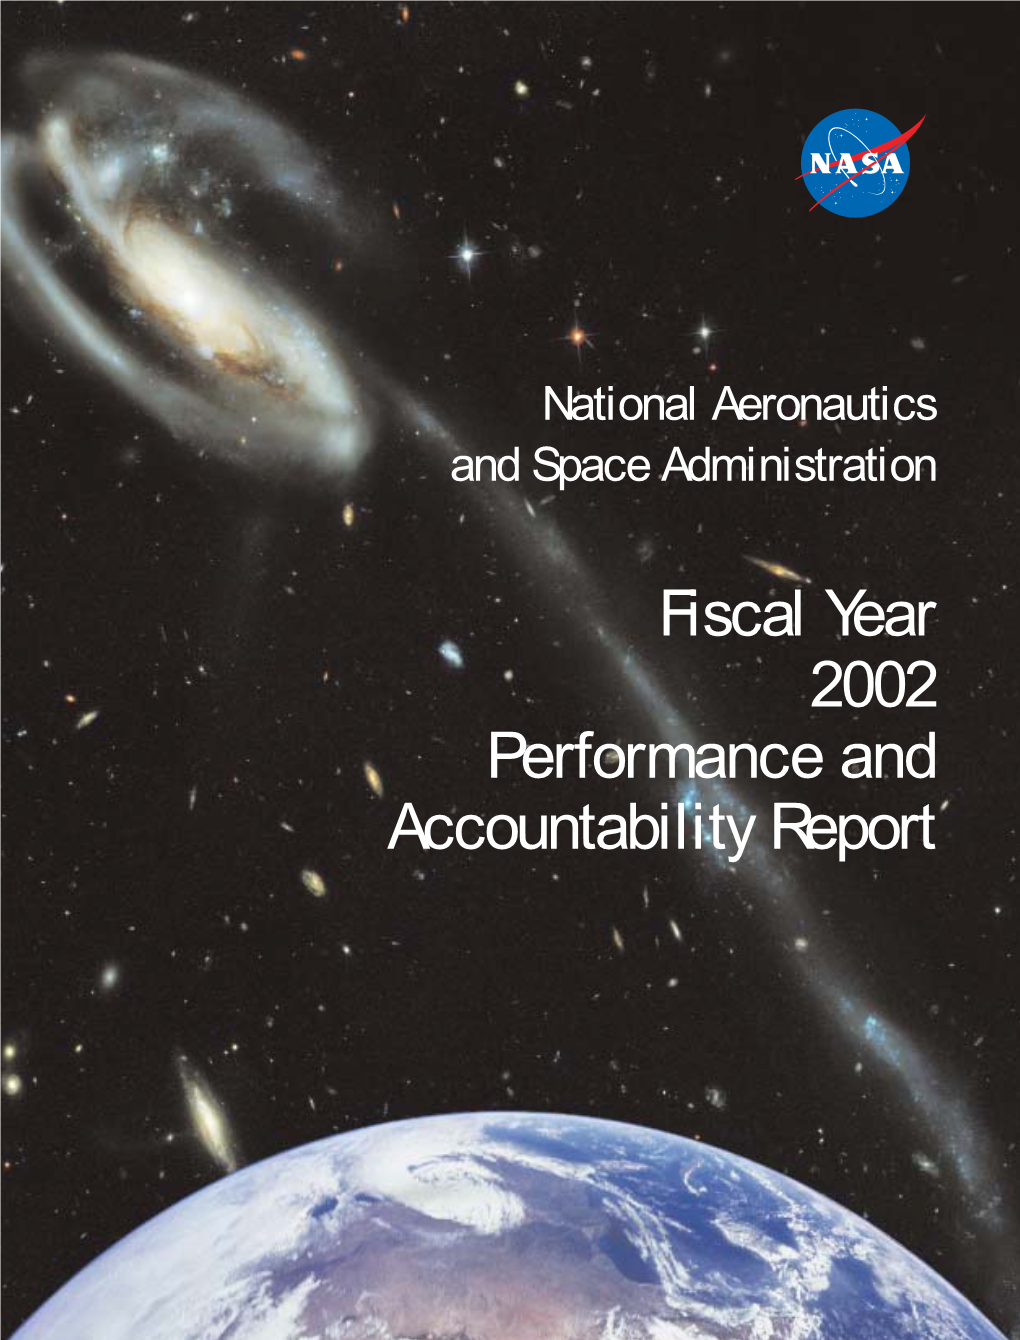 FY 2002 Performance and Accountability Report FY 2002 Was the Second Year of Continuous, Permanent Human Habitation of the International Space Station